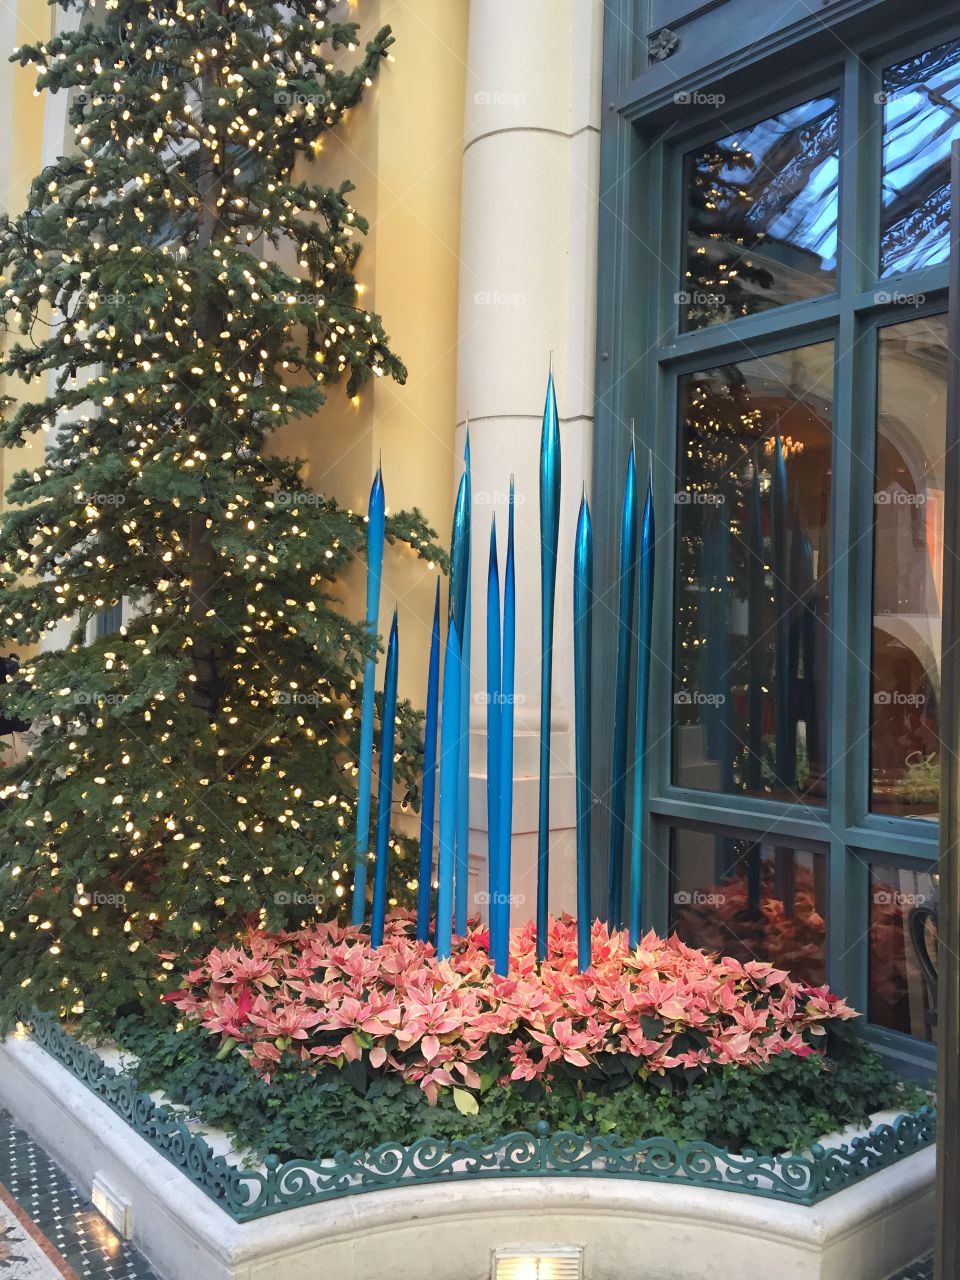 Skinny blue candles, poinsettia  & Christmas tree in window.